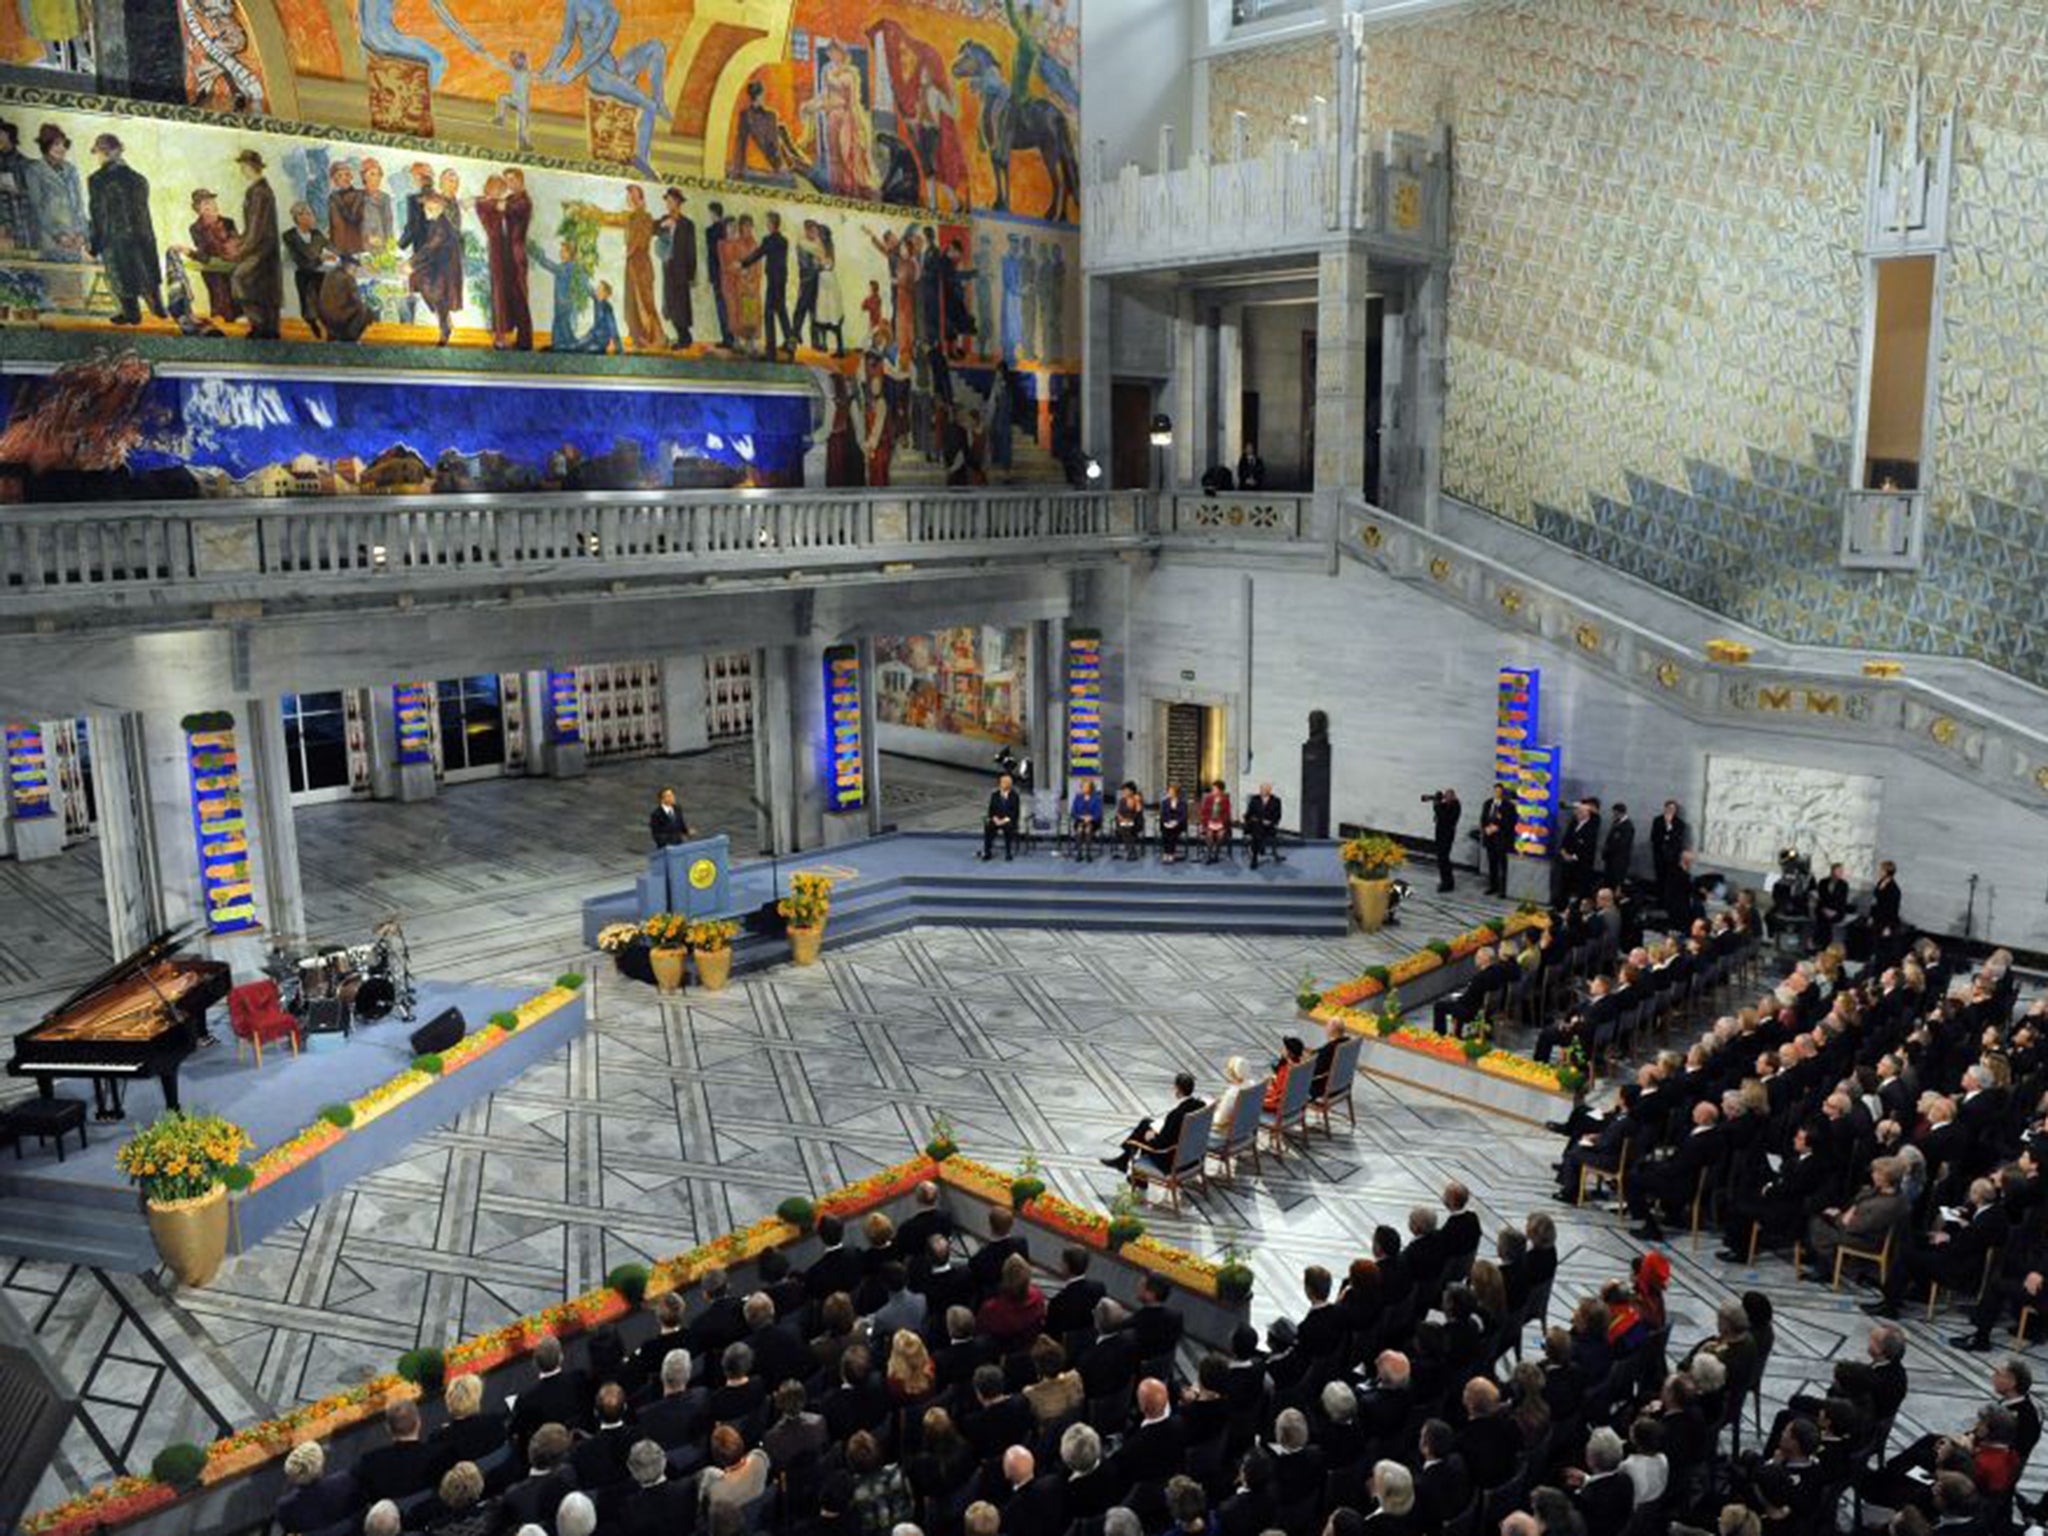 US President Barack Obama delivering his Nobel lecture at the Nobel Peace Prize award ceremony at City Hall in Oslo in 2009